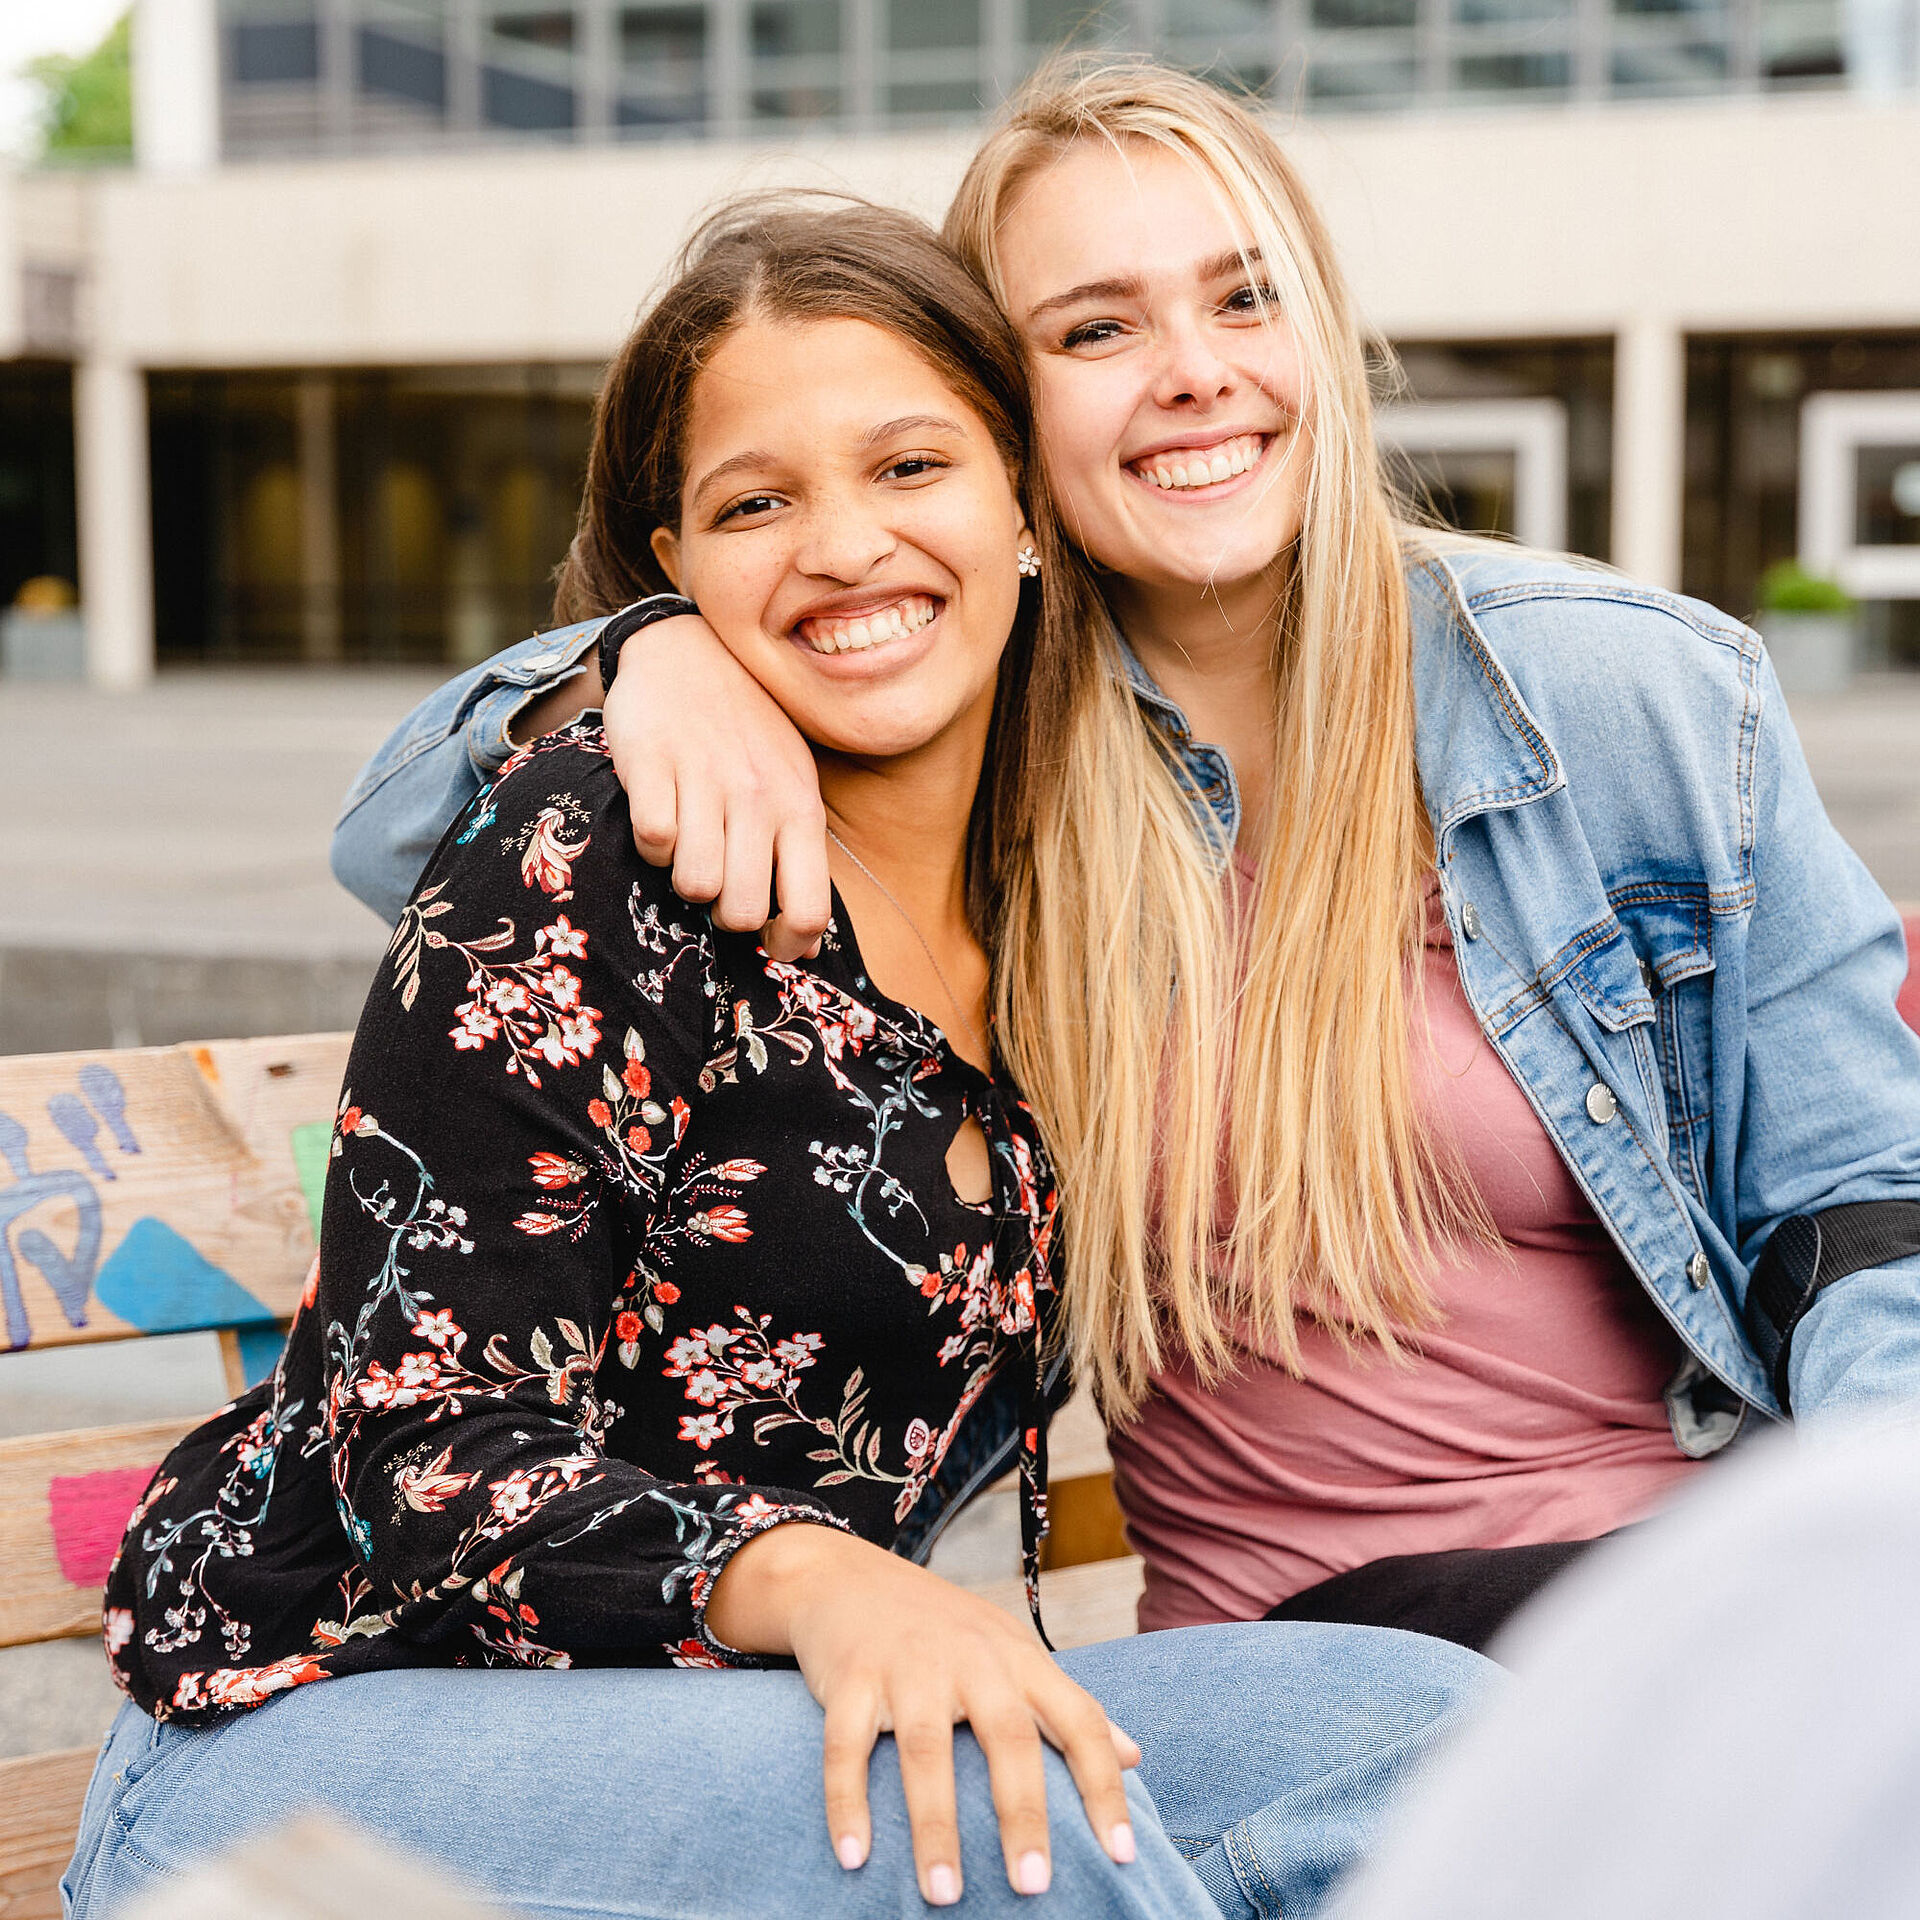 Two students sit on the university square and hug each other warmly.